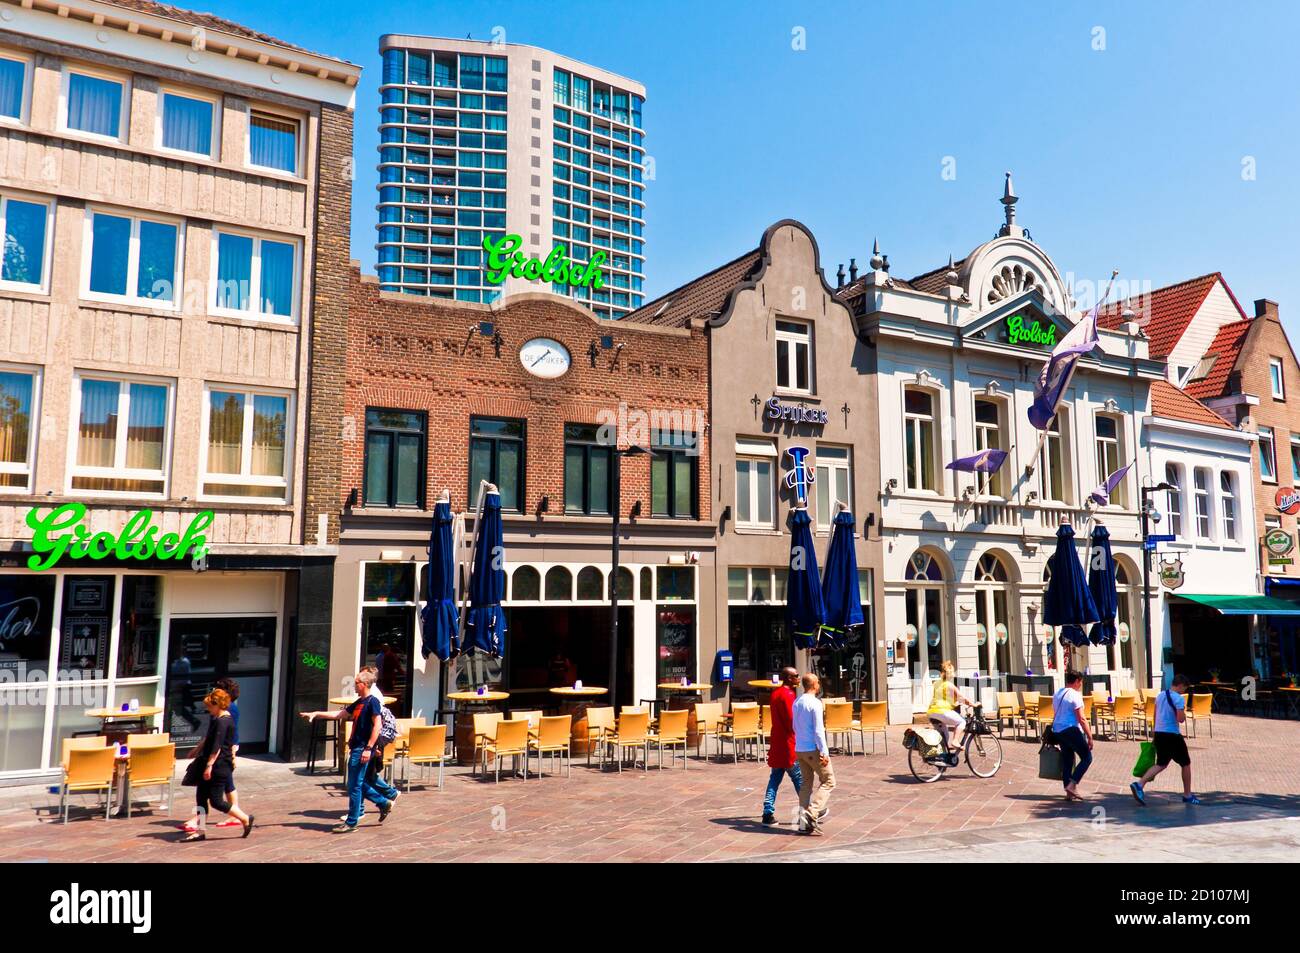 EINDHOVEN, THE NETHERLANDS - JUNE 8, 2013: Eindhoven City Center on a beautiful summer day. Dutch people enjoying a weekend in public areas. Stock Photo